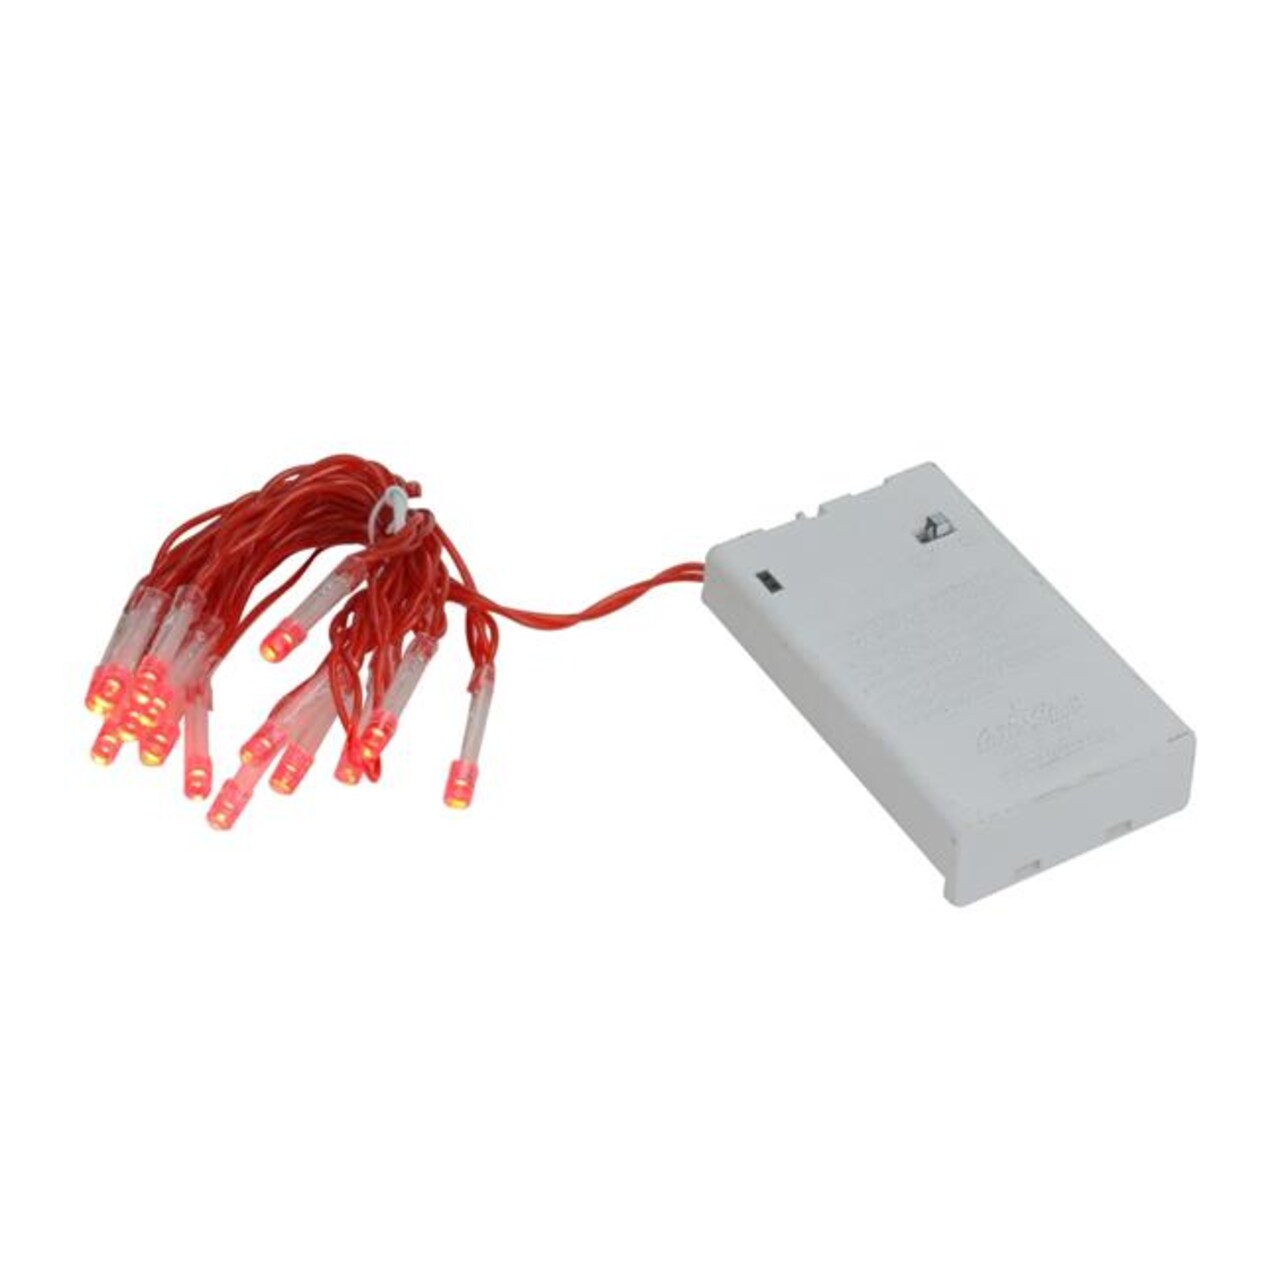 Brite Star 32815297 4.8 ft. Red Wire 15 Battery Operated Orange LED Micro Wide Angle Mini Christmas Lights